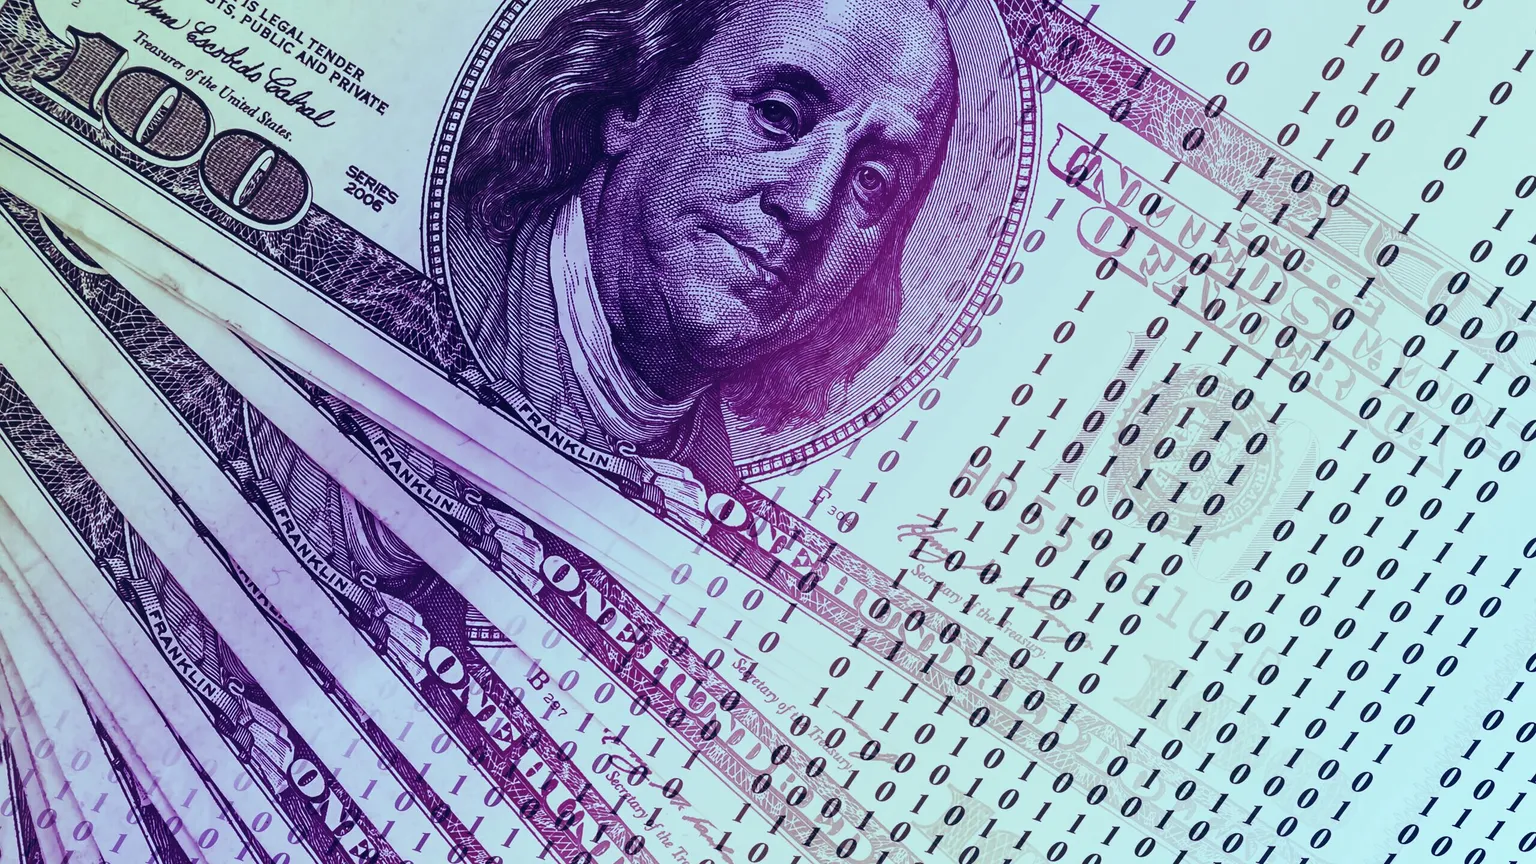 Early versions of new legislation to ease recession woes identified the “digital dollar” as a way to speed up the payment of emergency funds. (Image: Shutterstock)